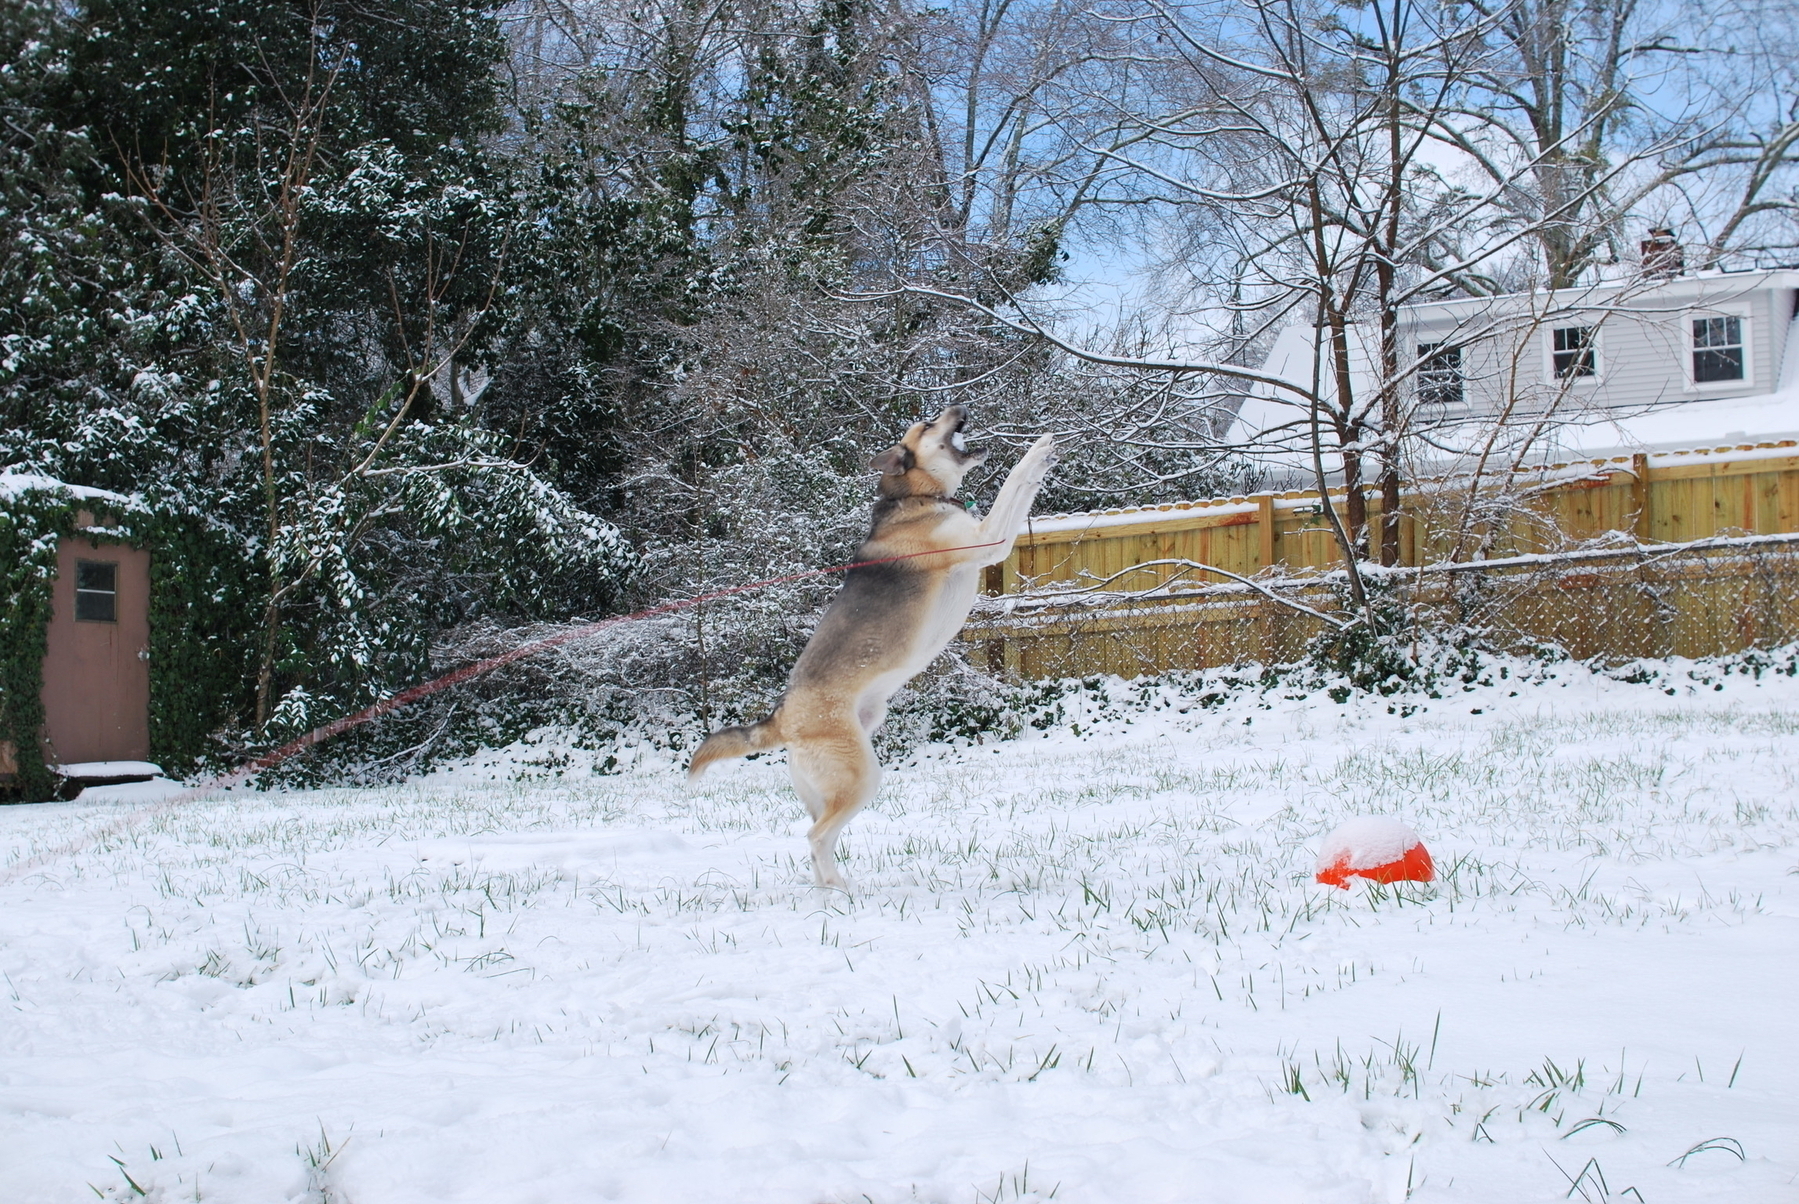 Toby leaping up in the snow